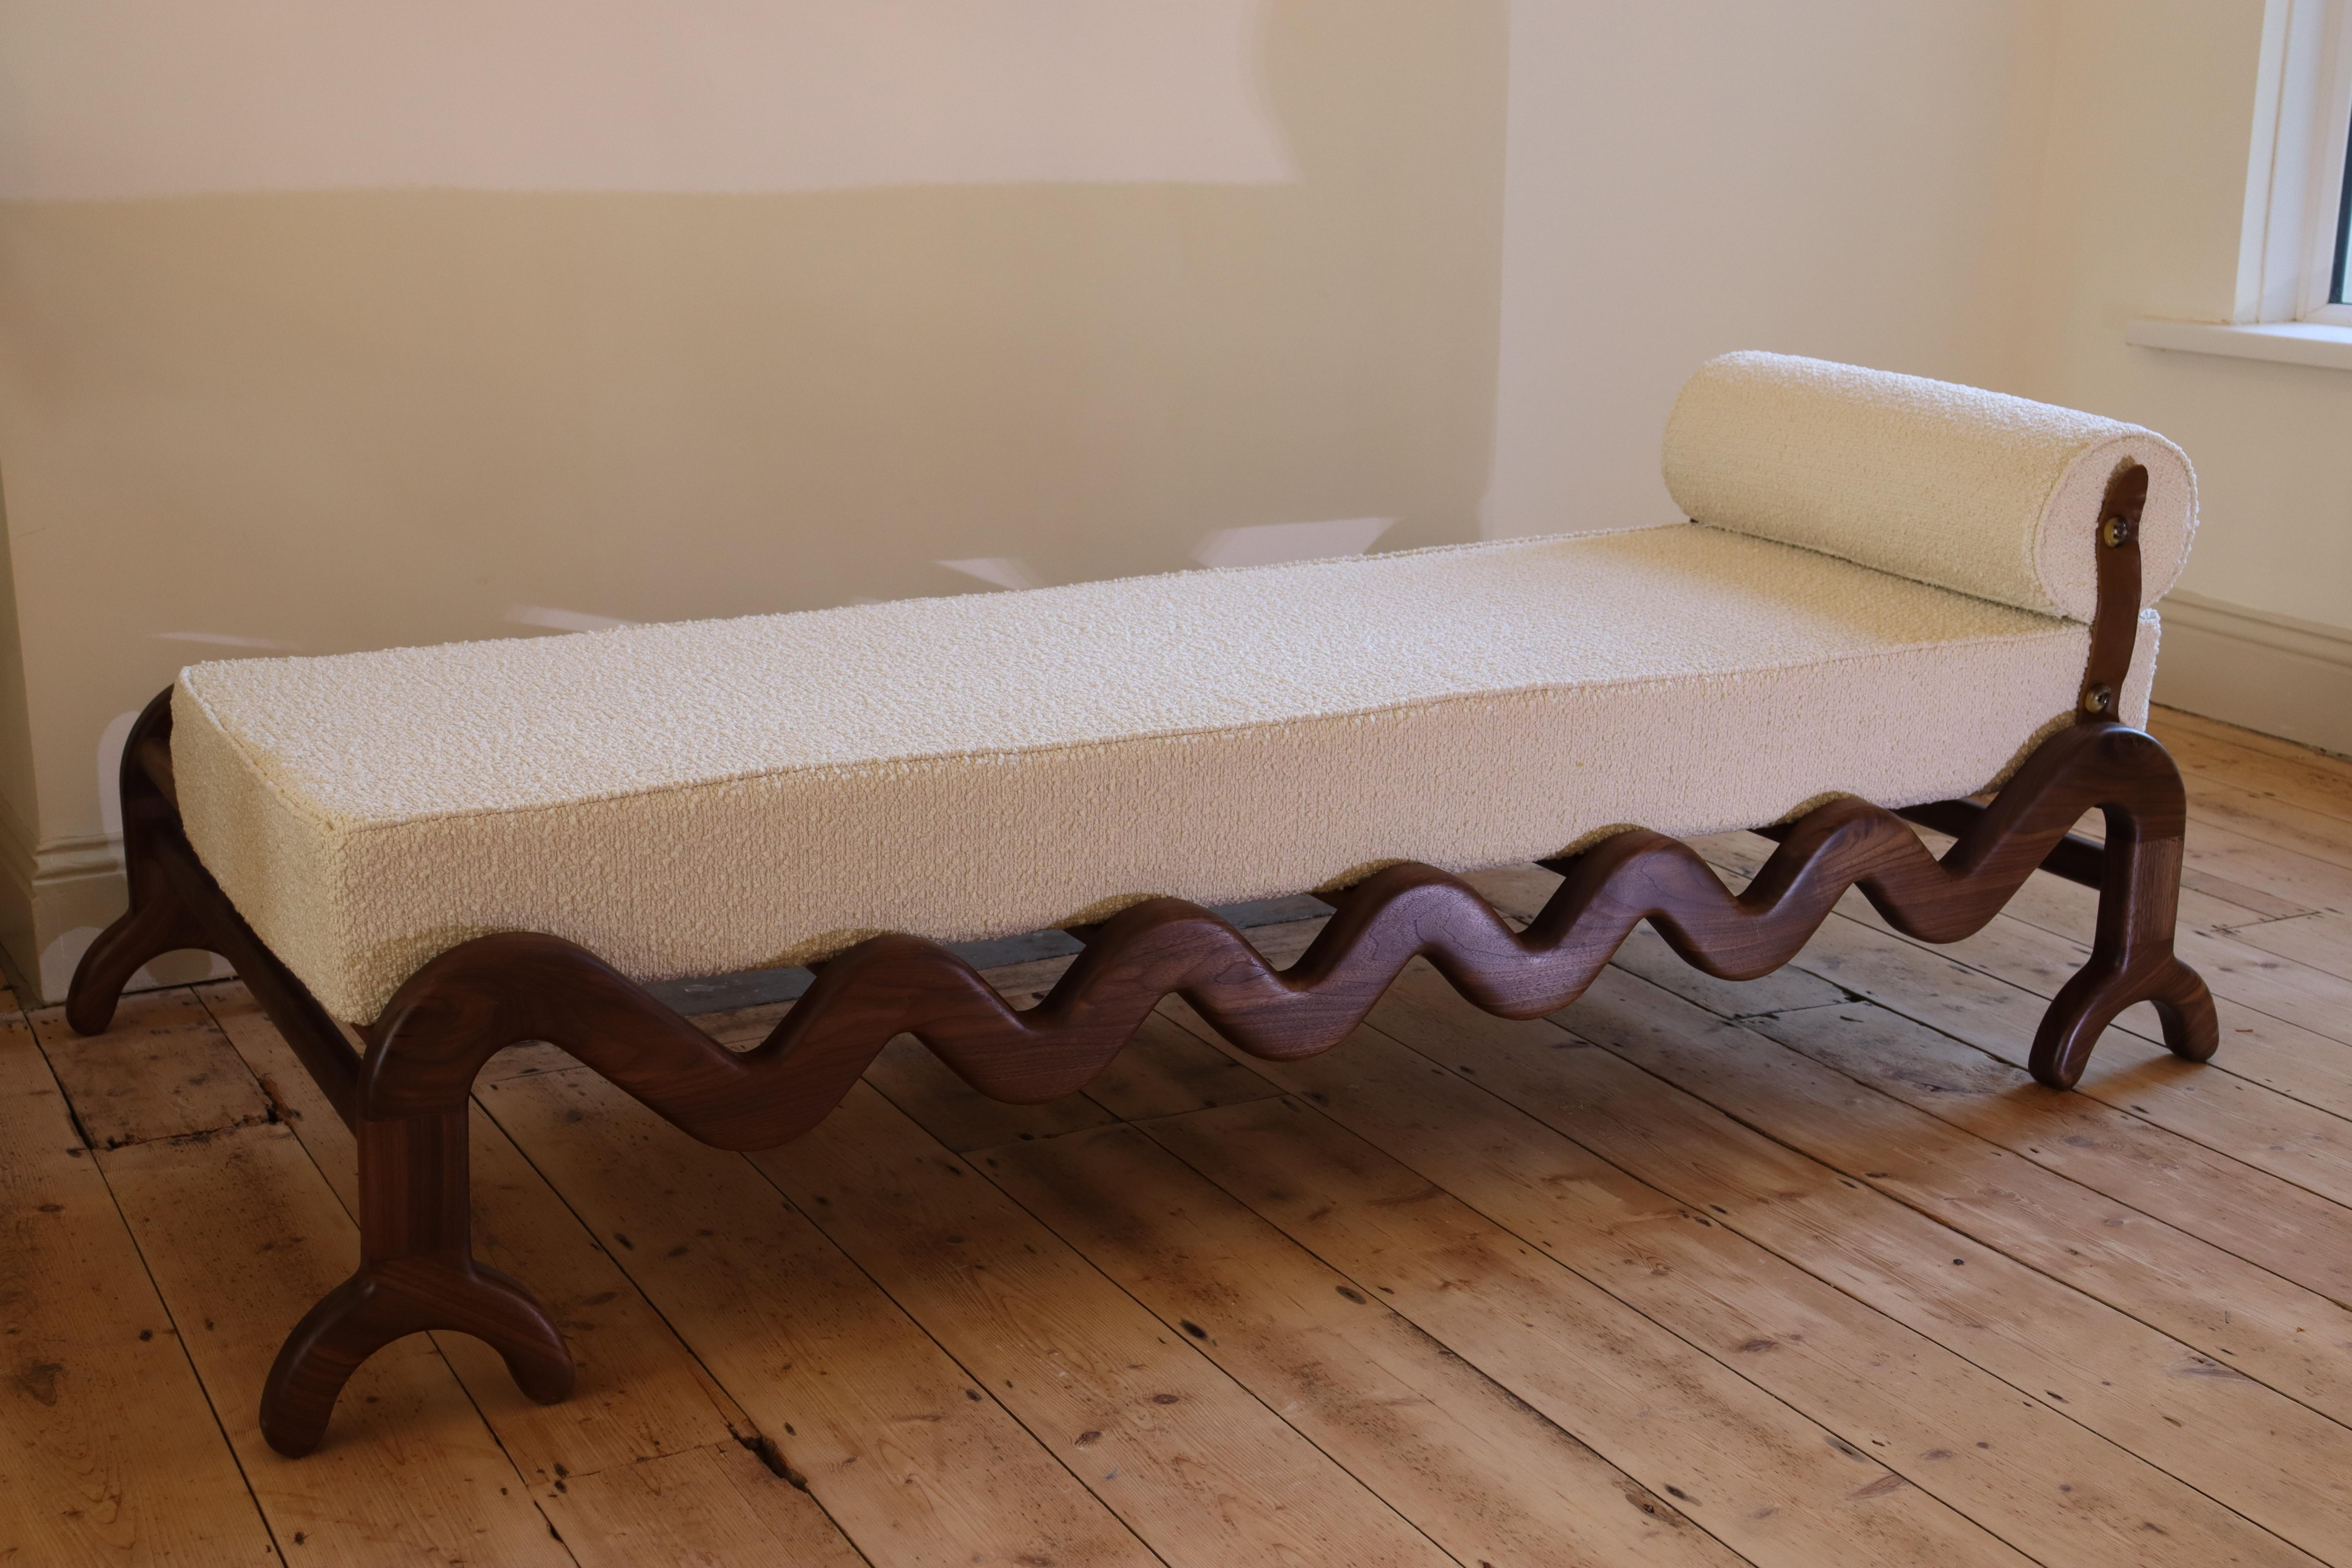 Part of the Sunday collection exclusive to Alexander & Ellis, and designed by Founder Oliver A-J, the Sunday Day Bed was designed and handcrafted in house with the finest Oak and Bouclé upholstery.

Available in other wood species’ and fabrics, the